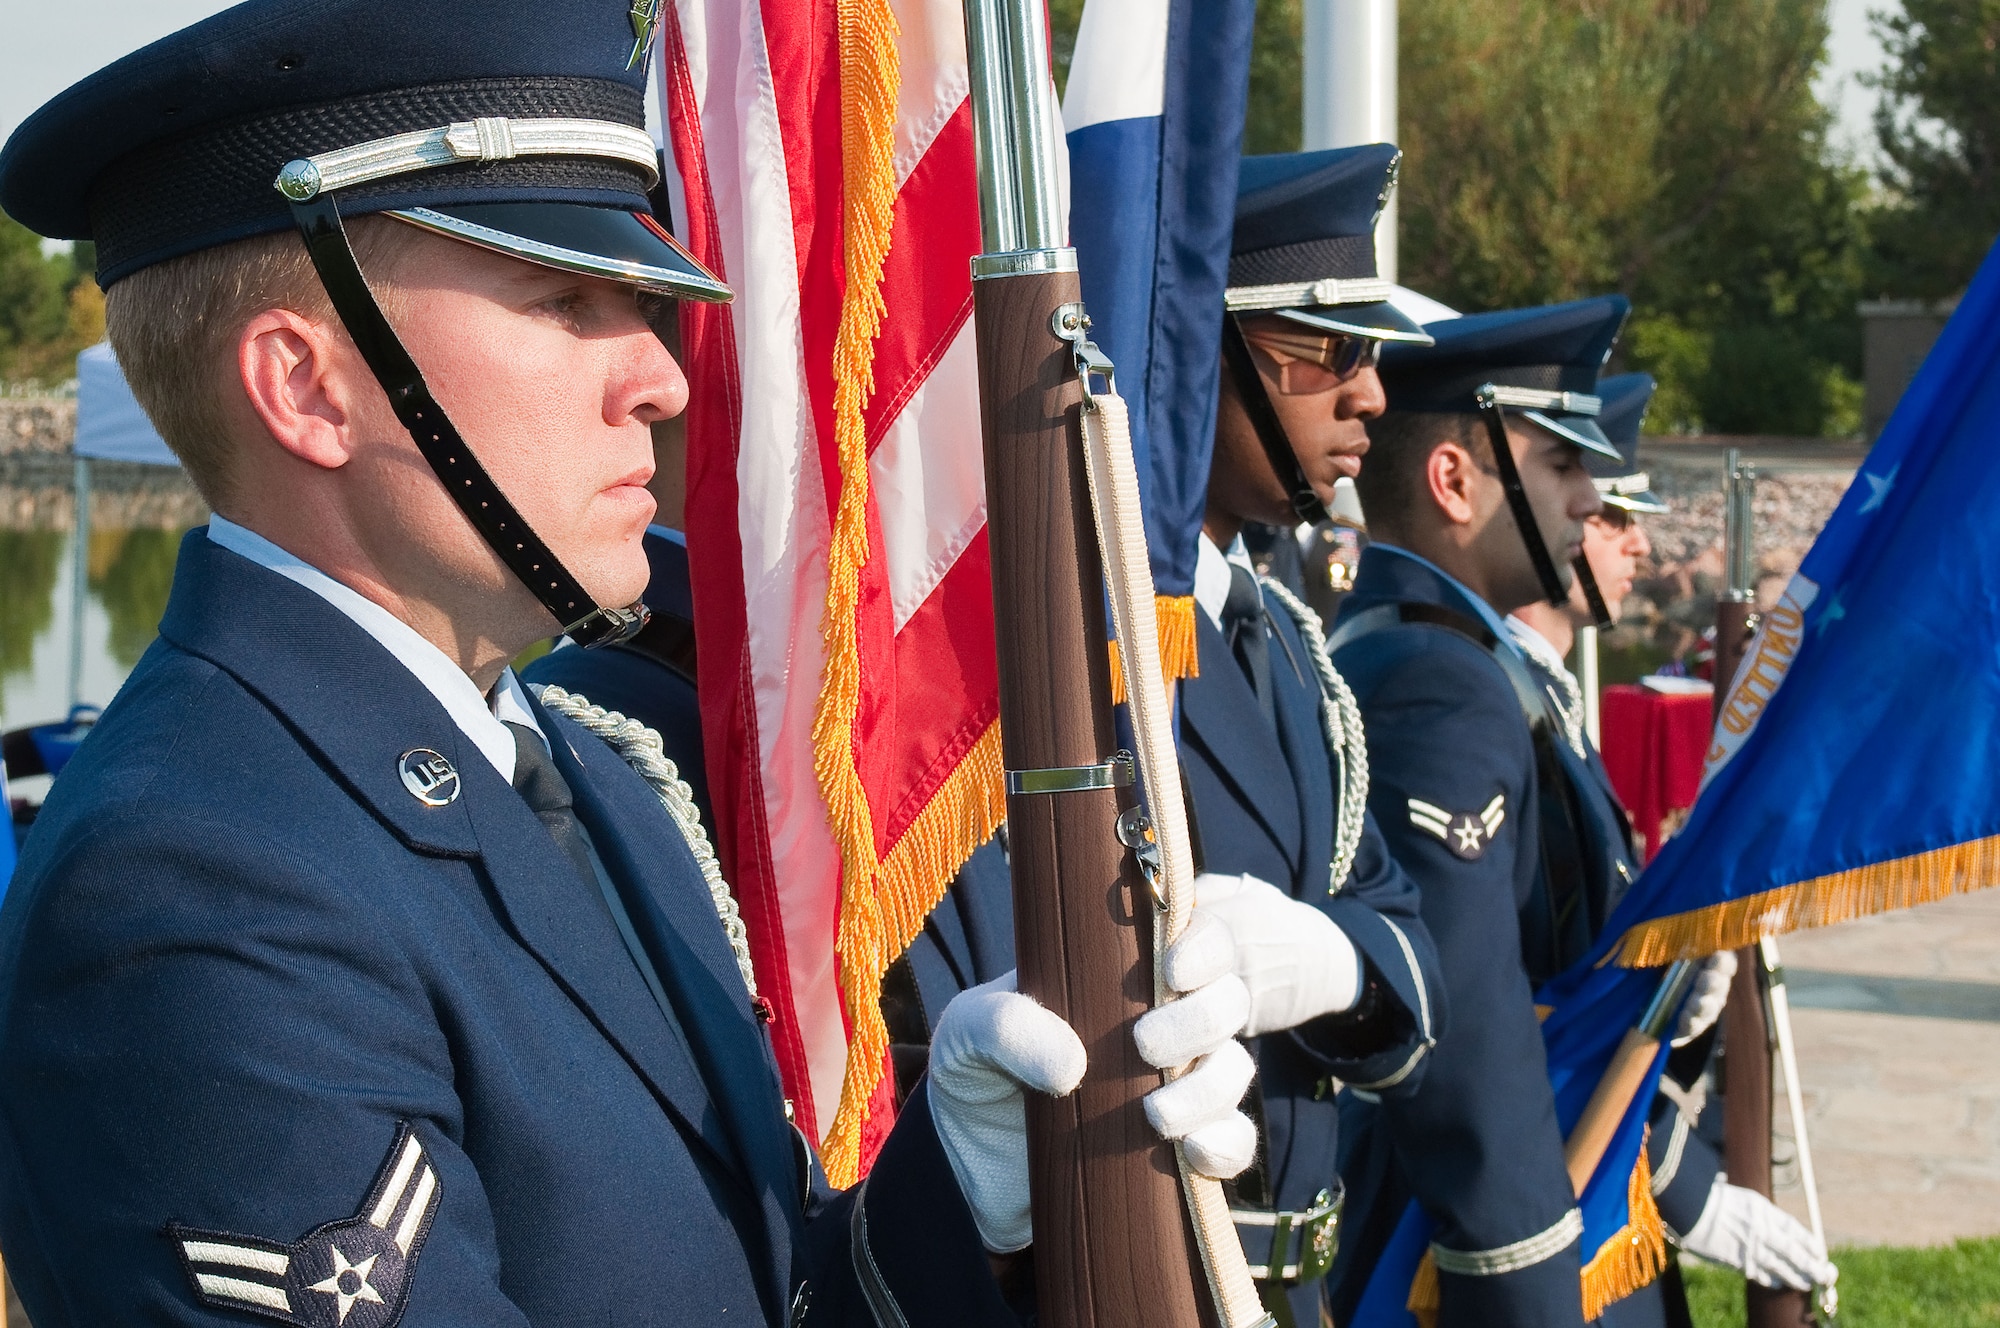 The 460th Space Wing Color Guard posts the colors for the ceremony to present the Prisoner of War Medal to retired Master Sgt. James O’Neal Hughes at Fort Logan National Cemetery, Denver, Colo.,  Aug. 22, 2012. On Nov. 4, 1979, then-Staff Sgt. Hughes was taken hostage along with 65 other Americans at the U.S. Embassy in Tehran, Iran, by a group of Iranian students. (Air National Guard photo/Capt. Darin Overstreet)
